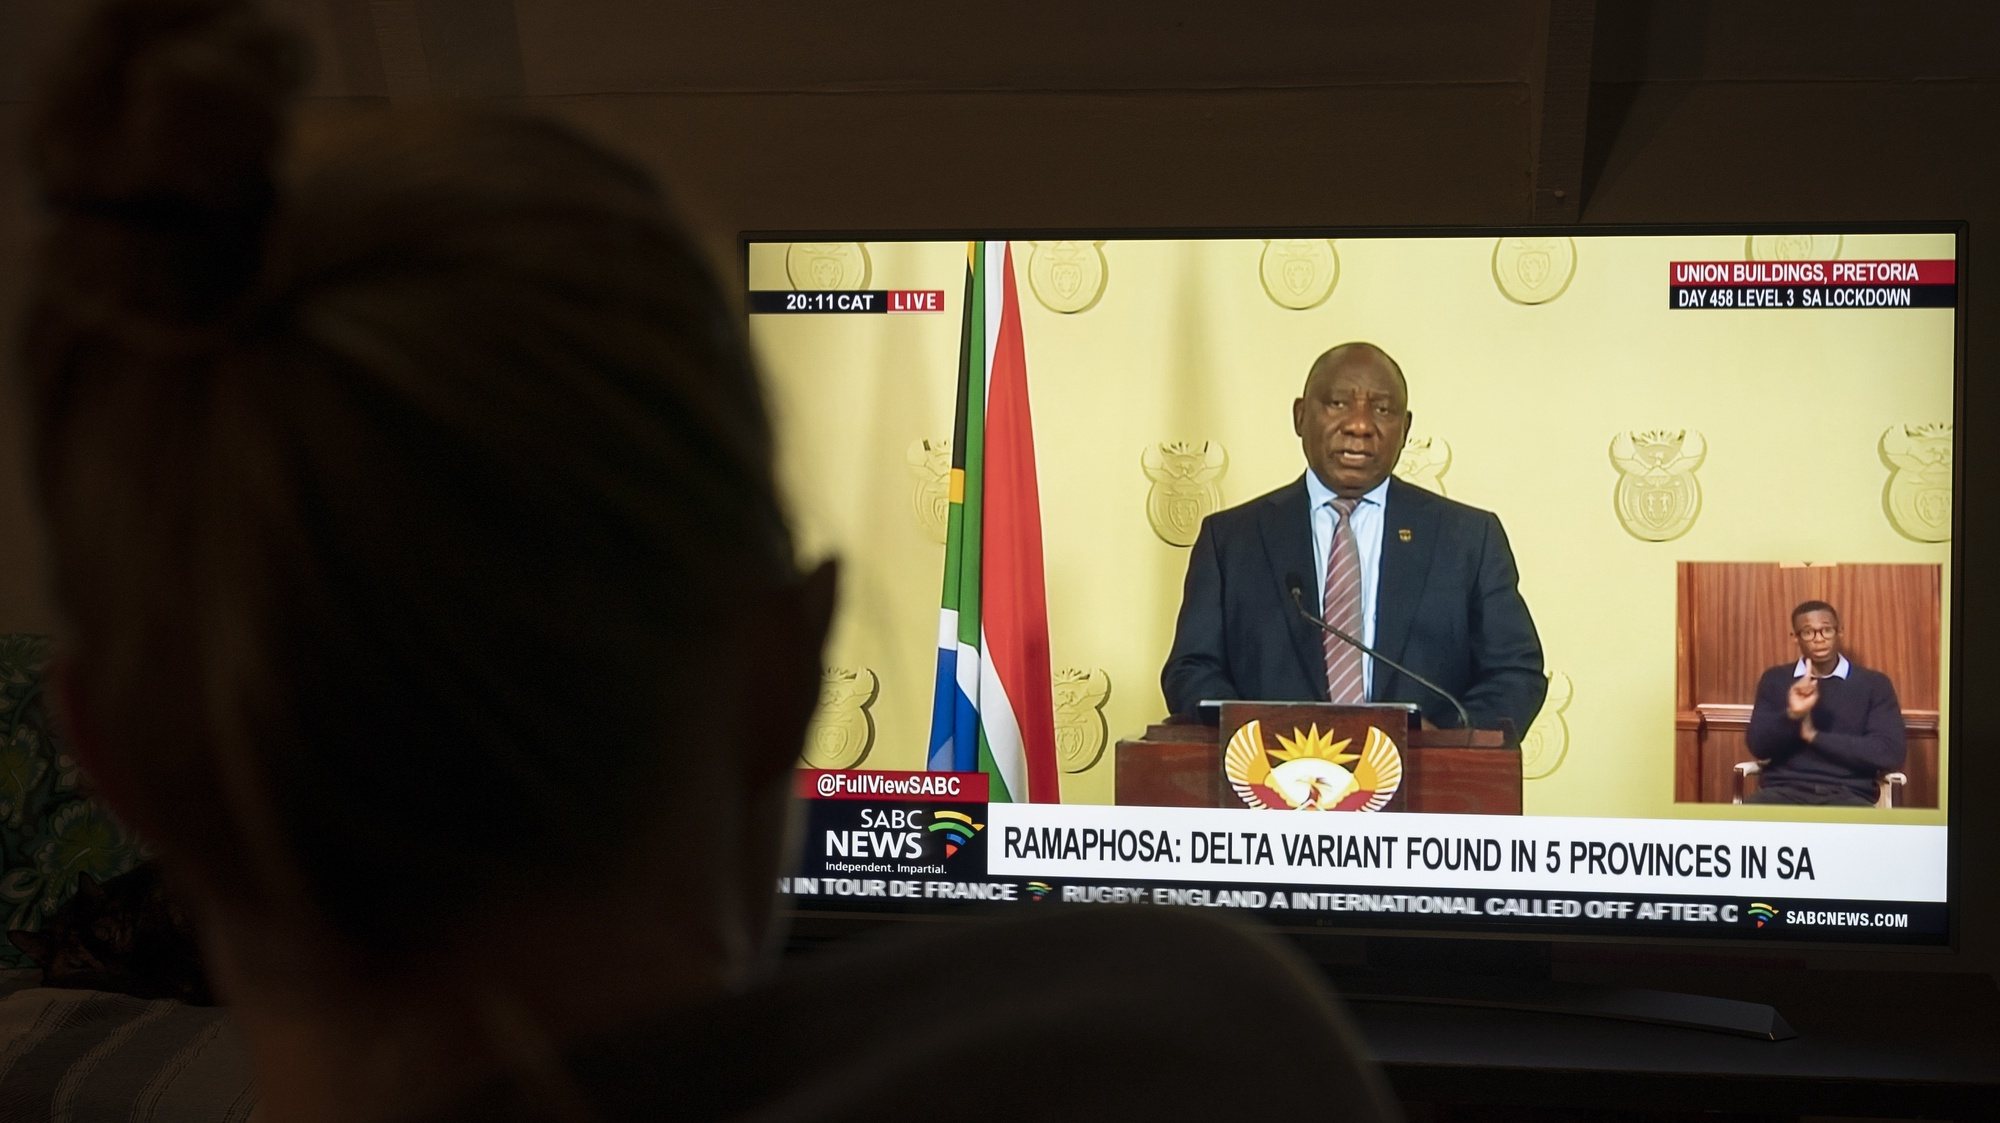 epa09306317 A South African watches a live television broadcast of President Cyril Ramaphosa announcing new restrictions in an attempt to slow a third wave of Covid-19 across the country, in Cape Town, South Africa, 27 June 2021. South African President Ramaphosa announced the country will move to adjusted alert level 4 with travel in and out of the epicenter Gauteng Province restricted as the country struggles to contain a third wave with a rapidly spreading Delta variant of the Sars-Cov-2 coronavirus that causes the Covid-19 disease.  EPA/NIC BOTHMA